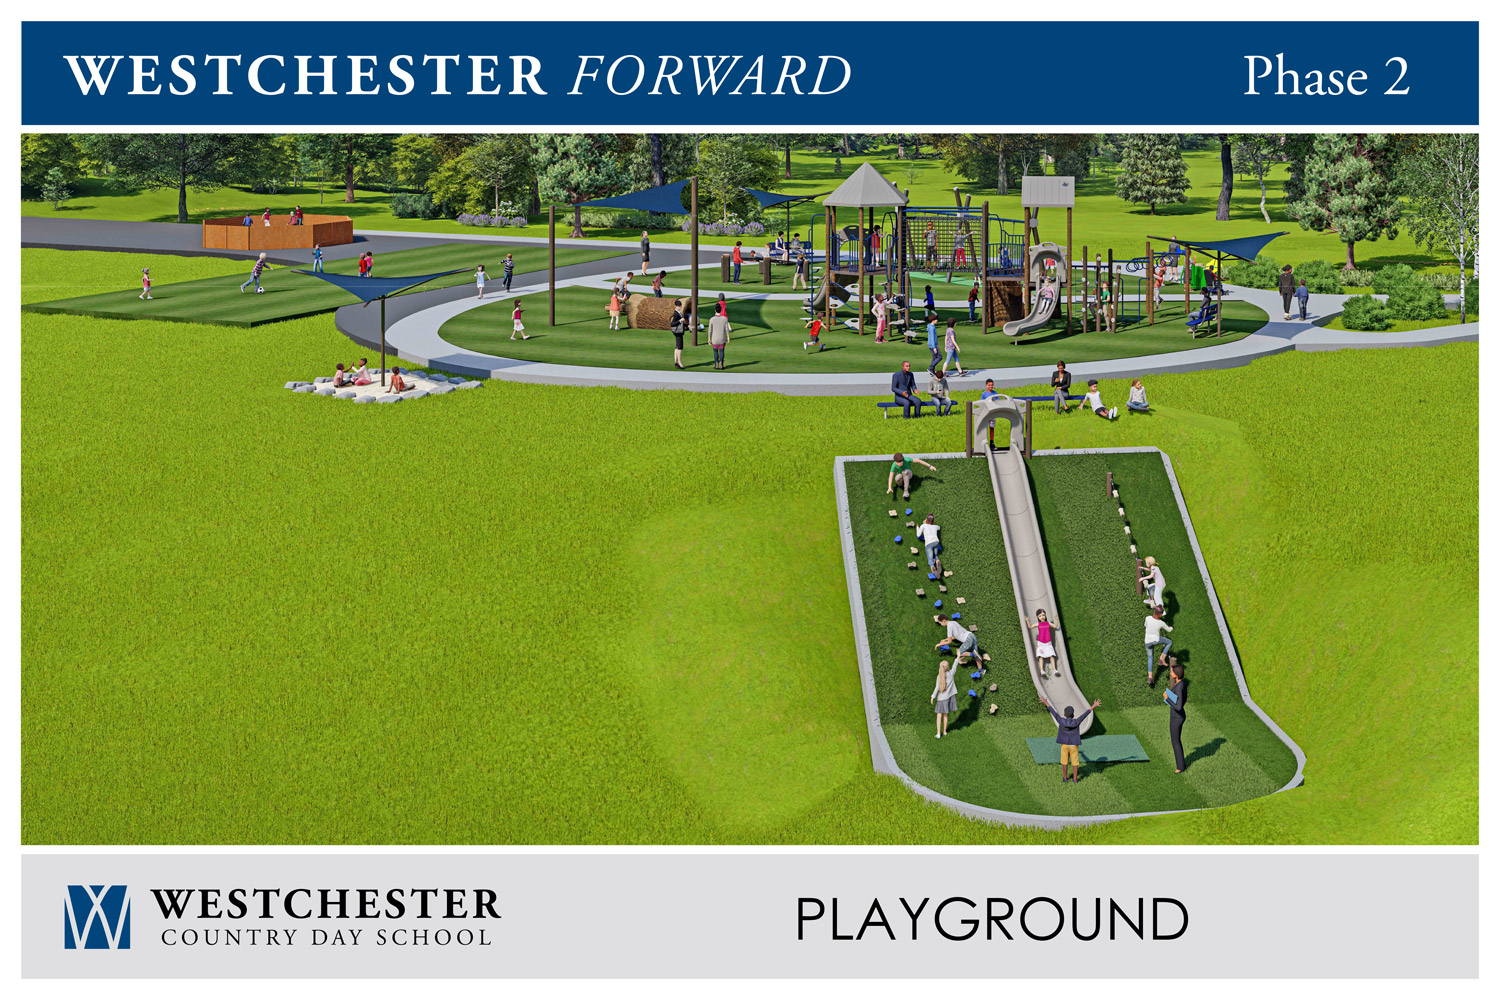 Work. Live. Play. Westchester!